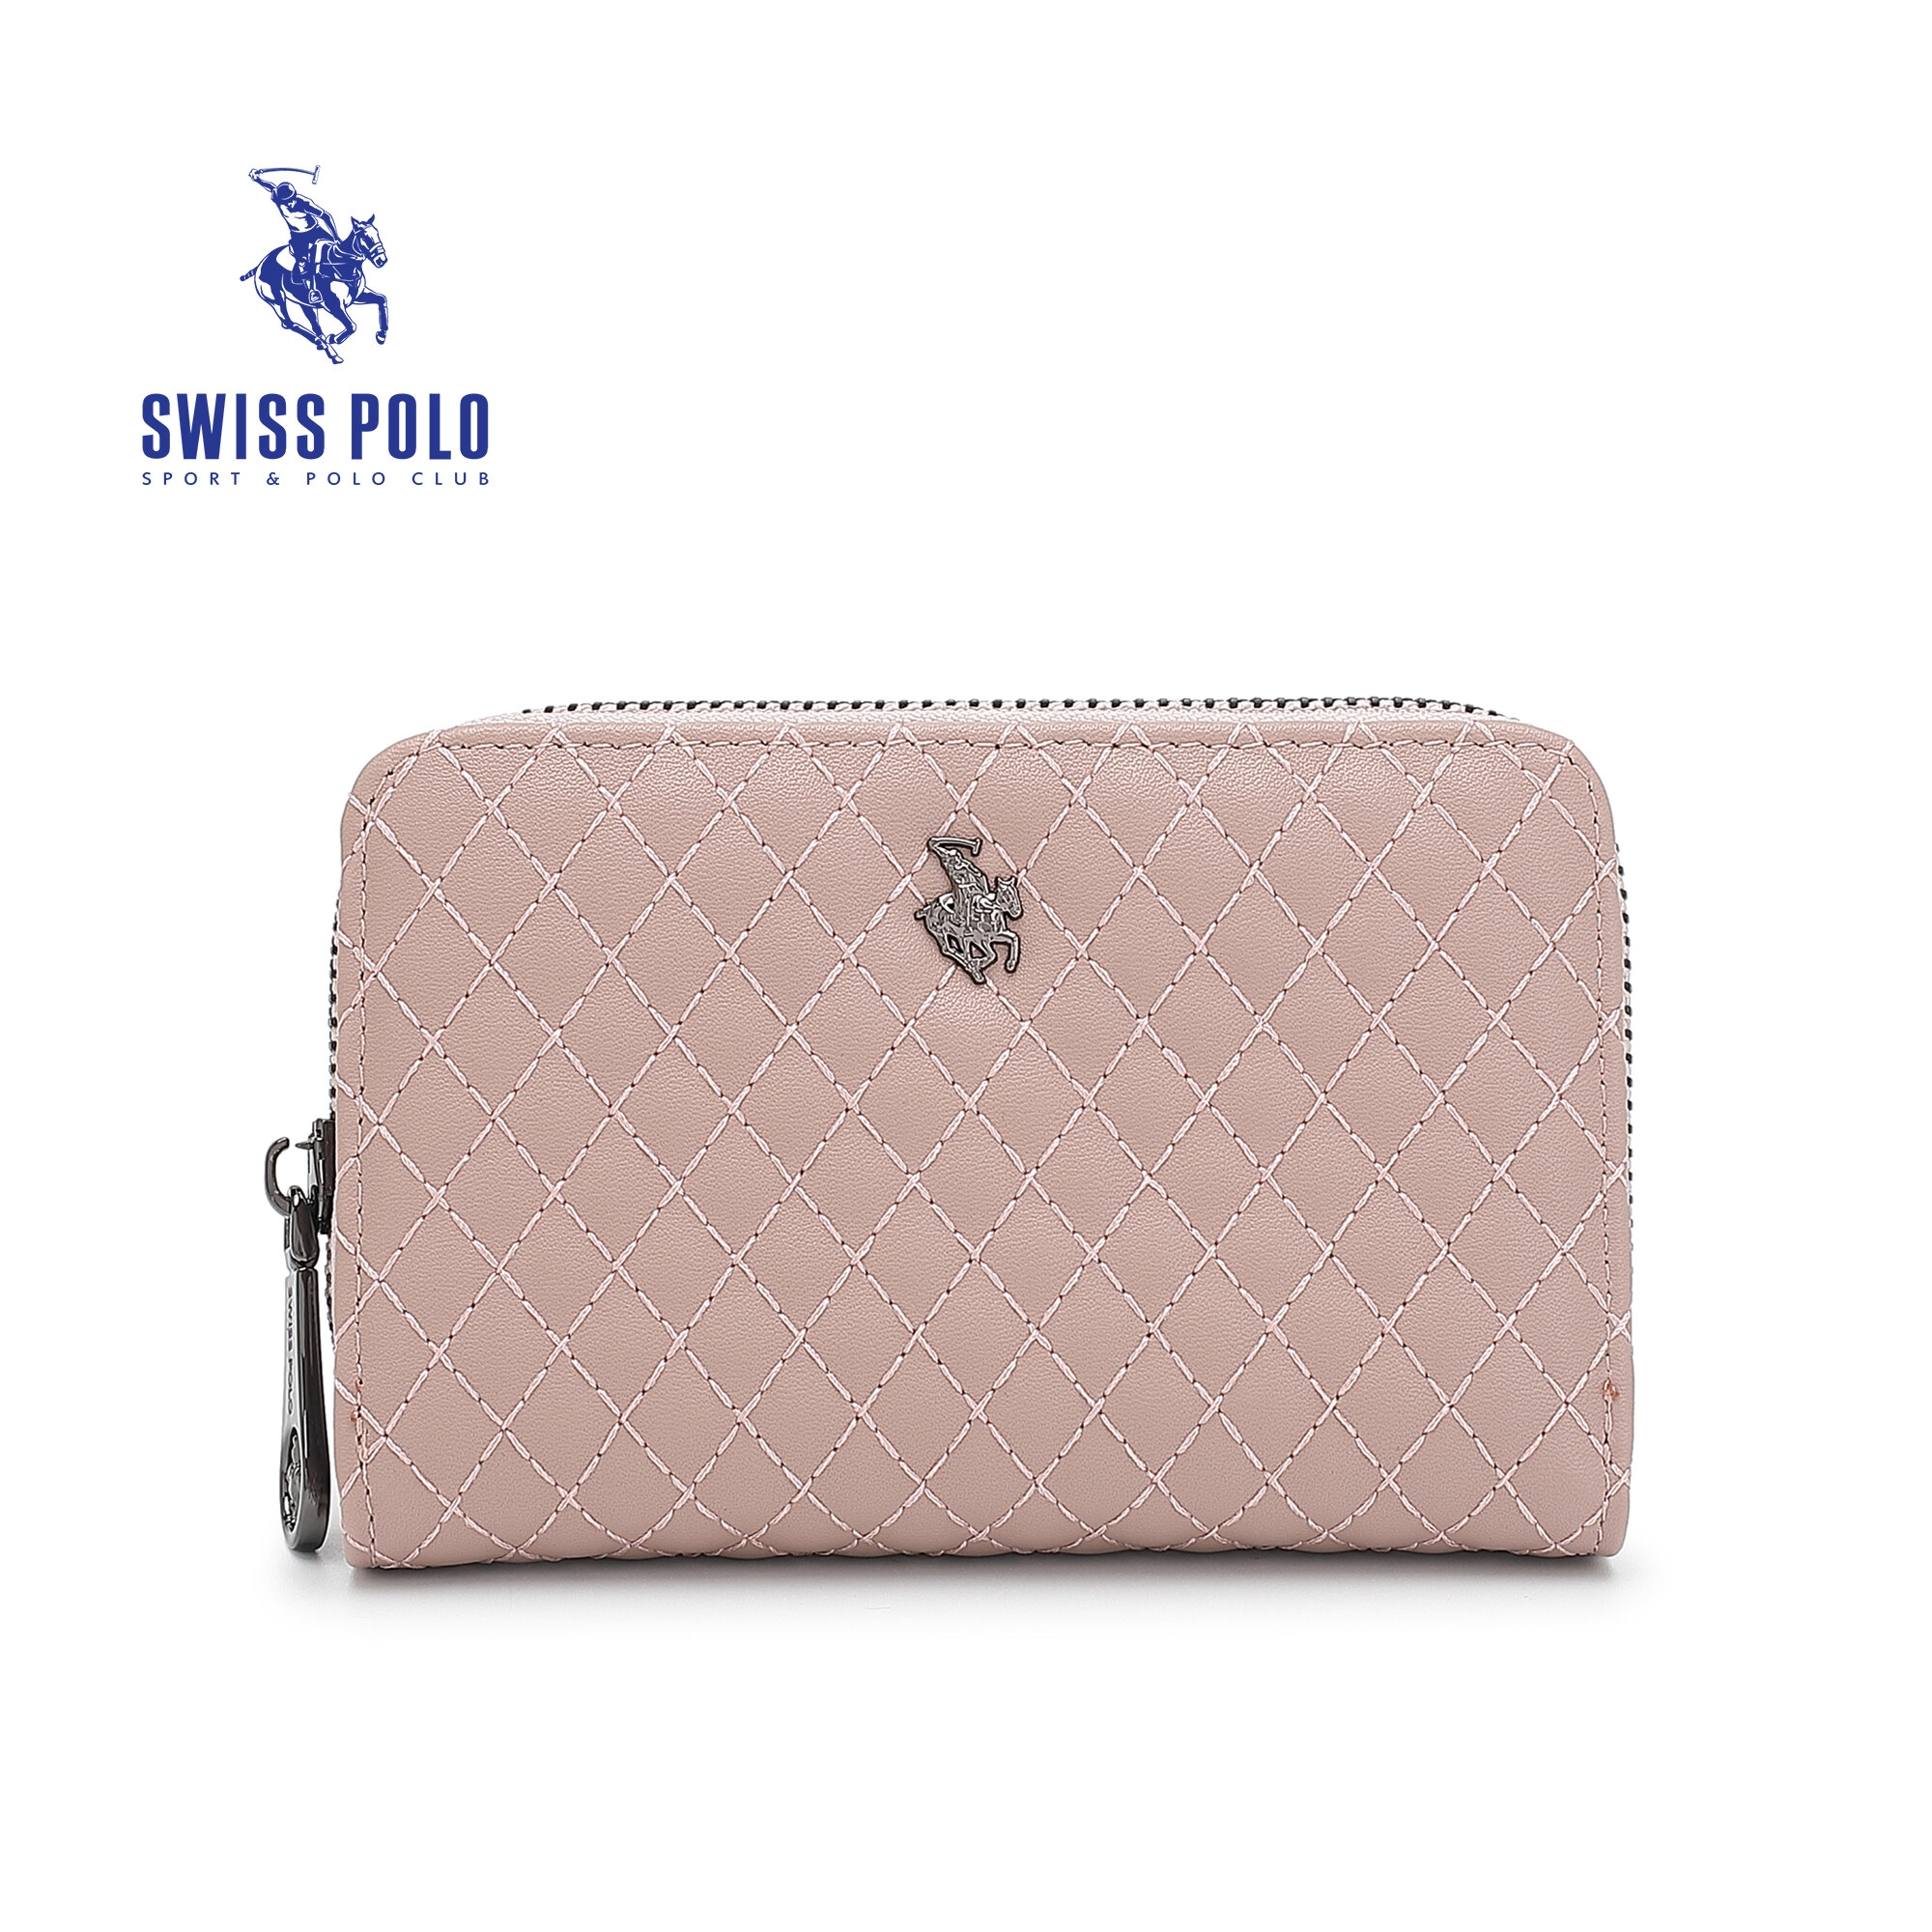 SWISS POLO Ladies Quilted Short Purse SLP 56-4 PINK